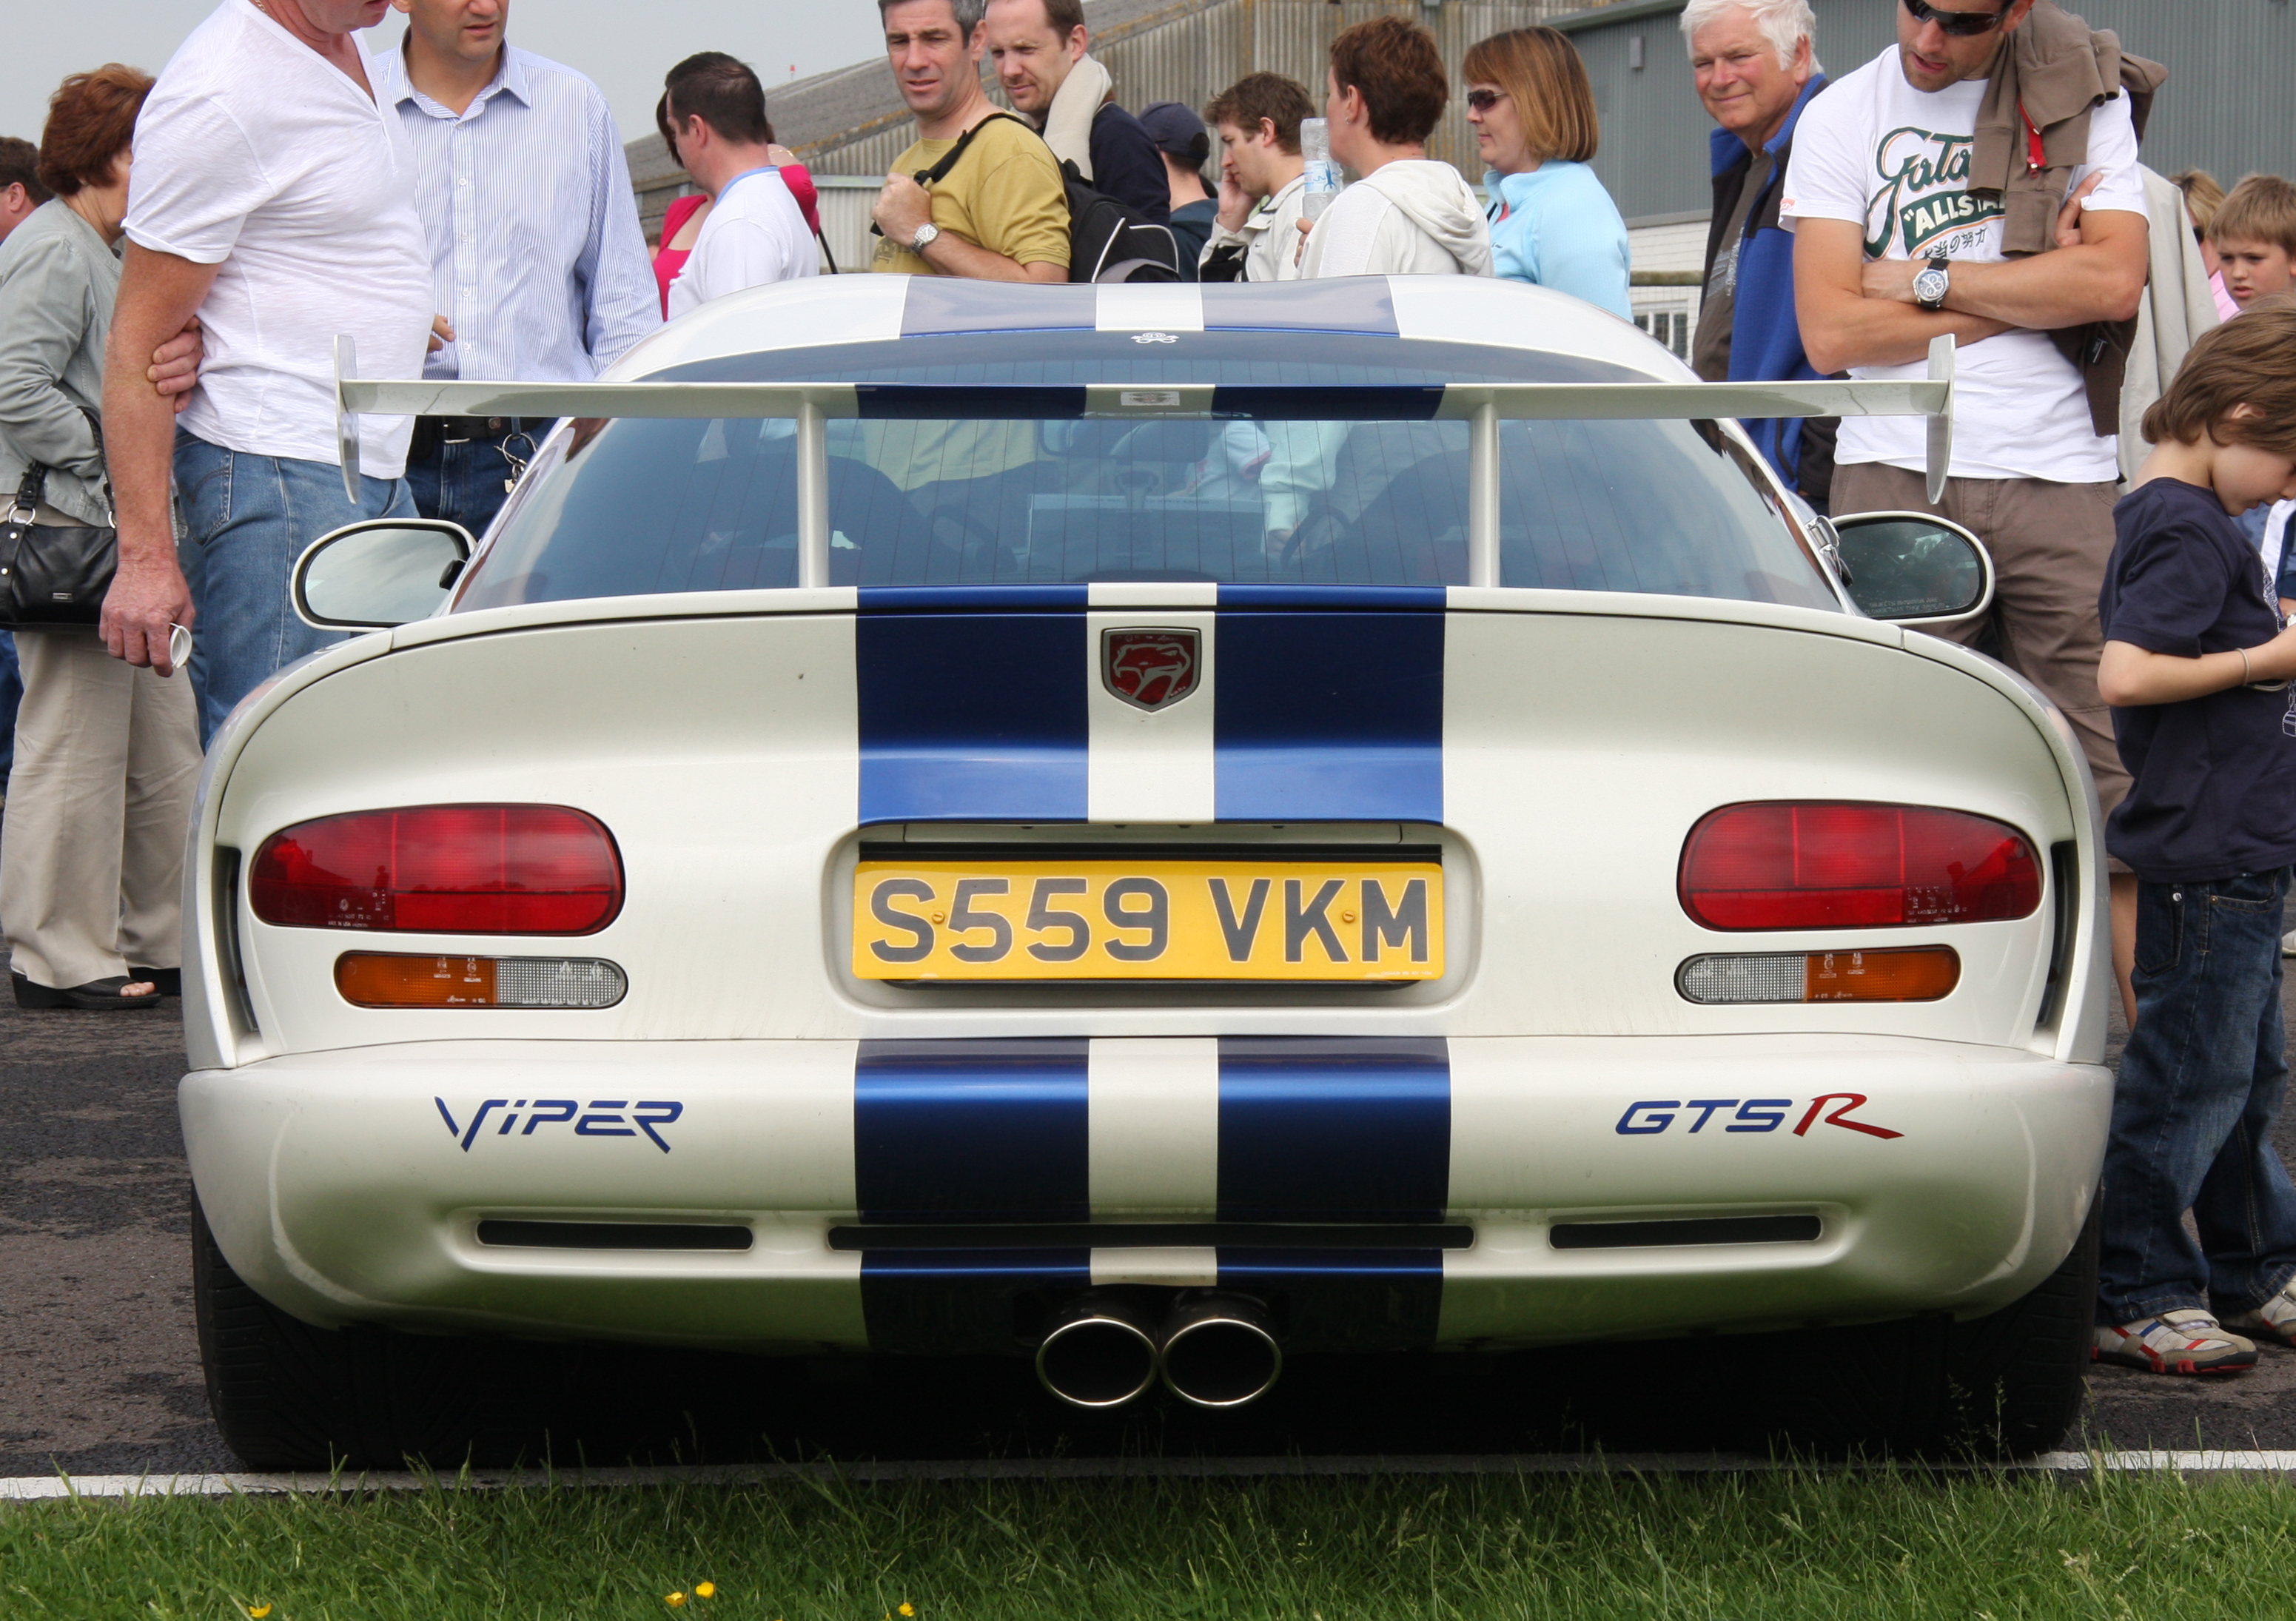 File:Dodge Viper GTS-R - Flickr - exfordy.jpg - Wikimedia Commons